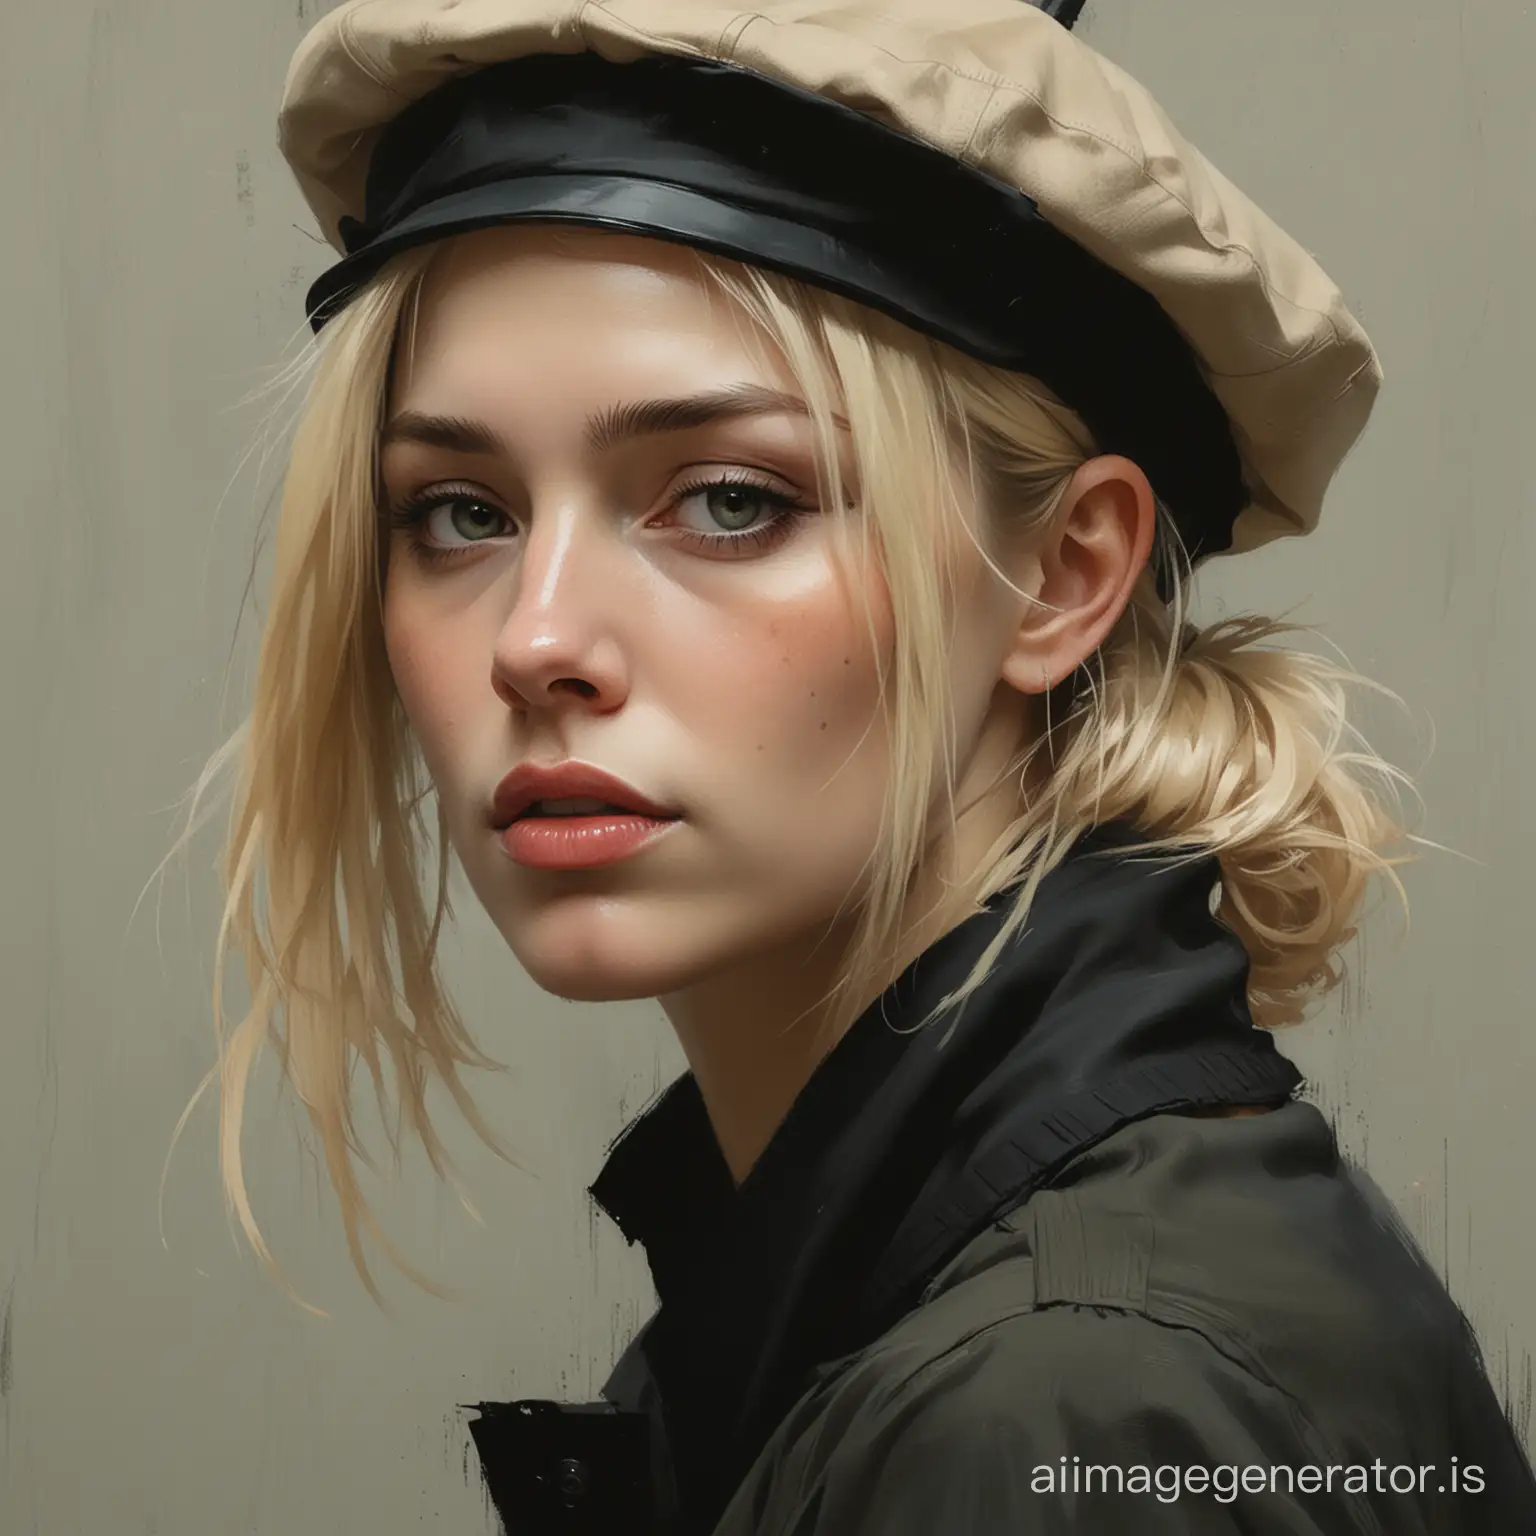 painting by Jeremy Mann, Jeremy Mann style drawing, sad blonde woman in beret, close-up, 3/4 profile, detail, full style.